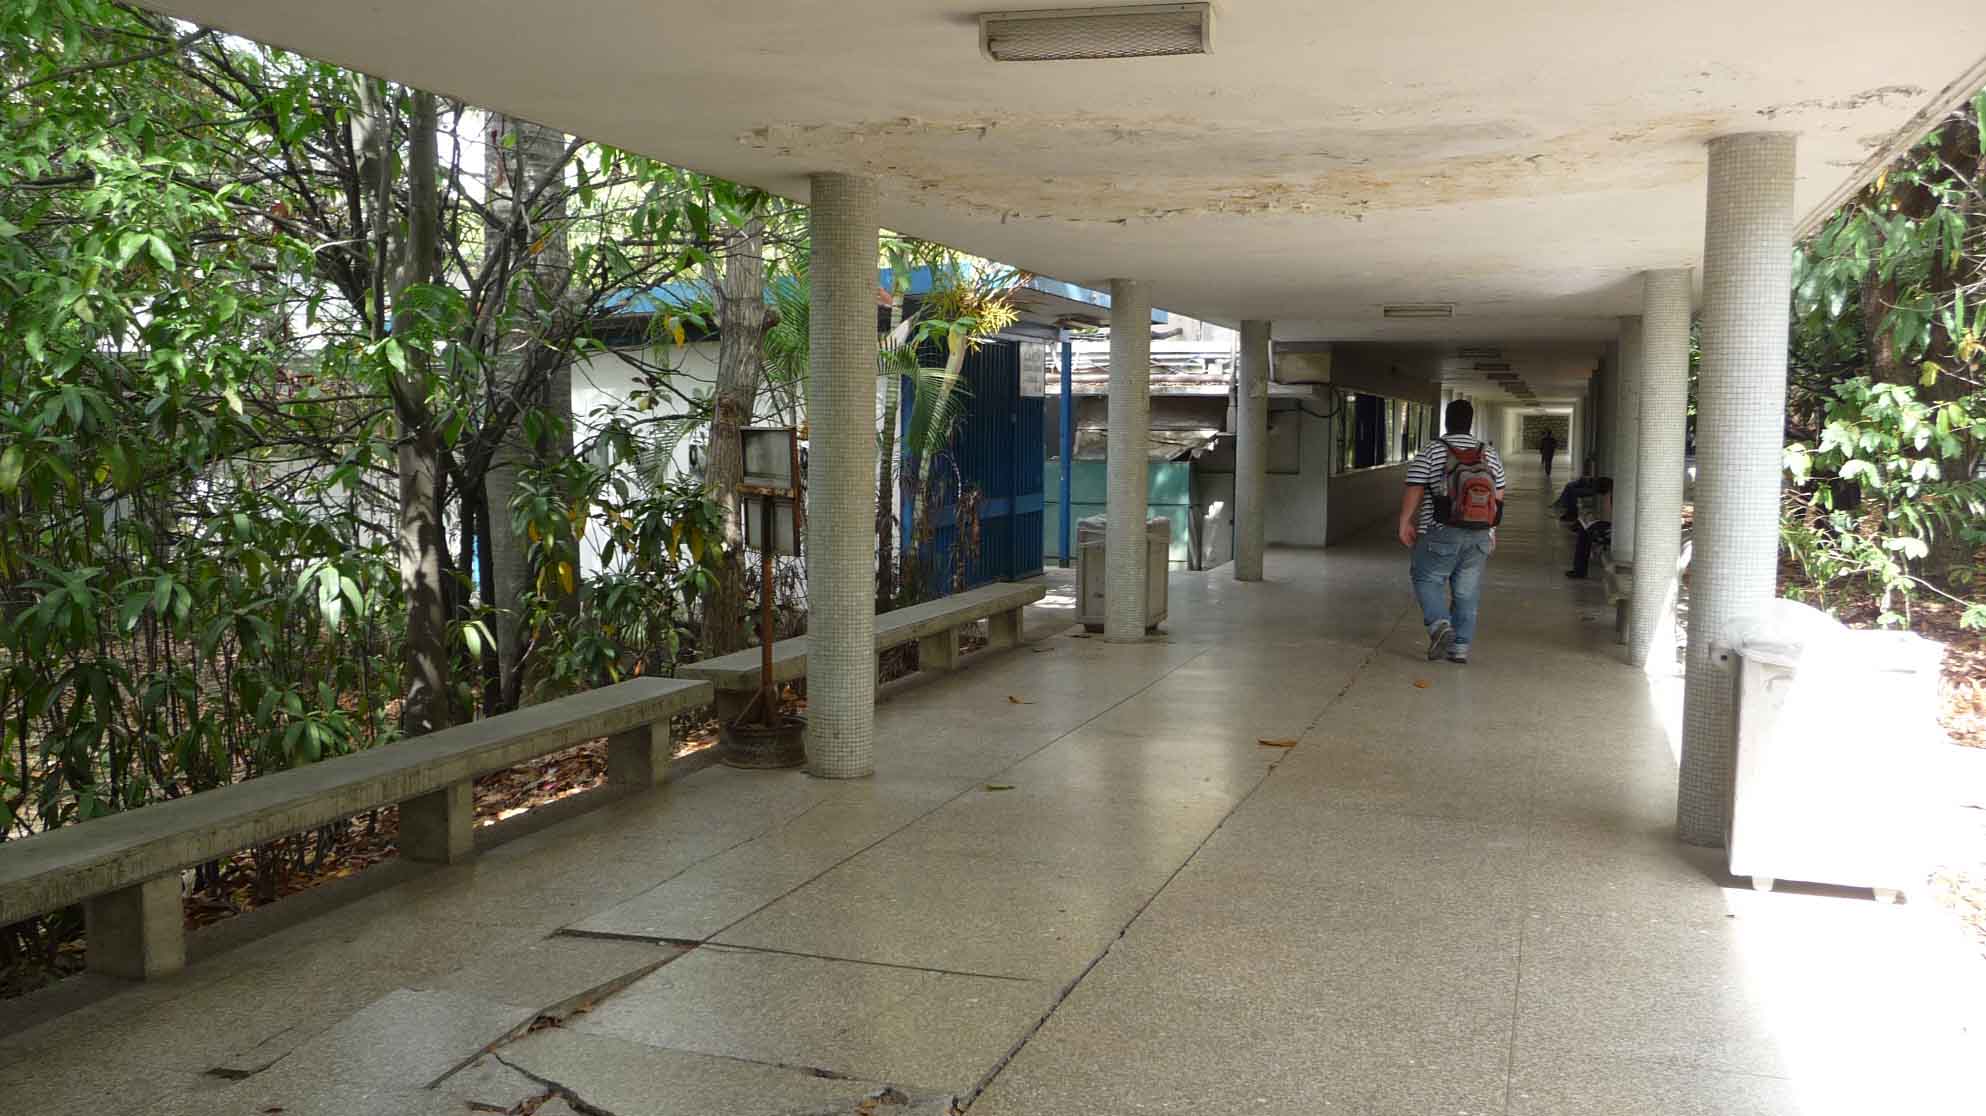 Decay and government neglect: Tough lessons at Central University of Venezuela